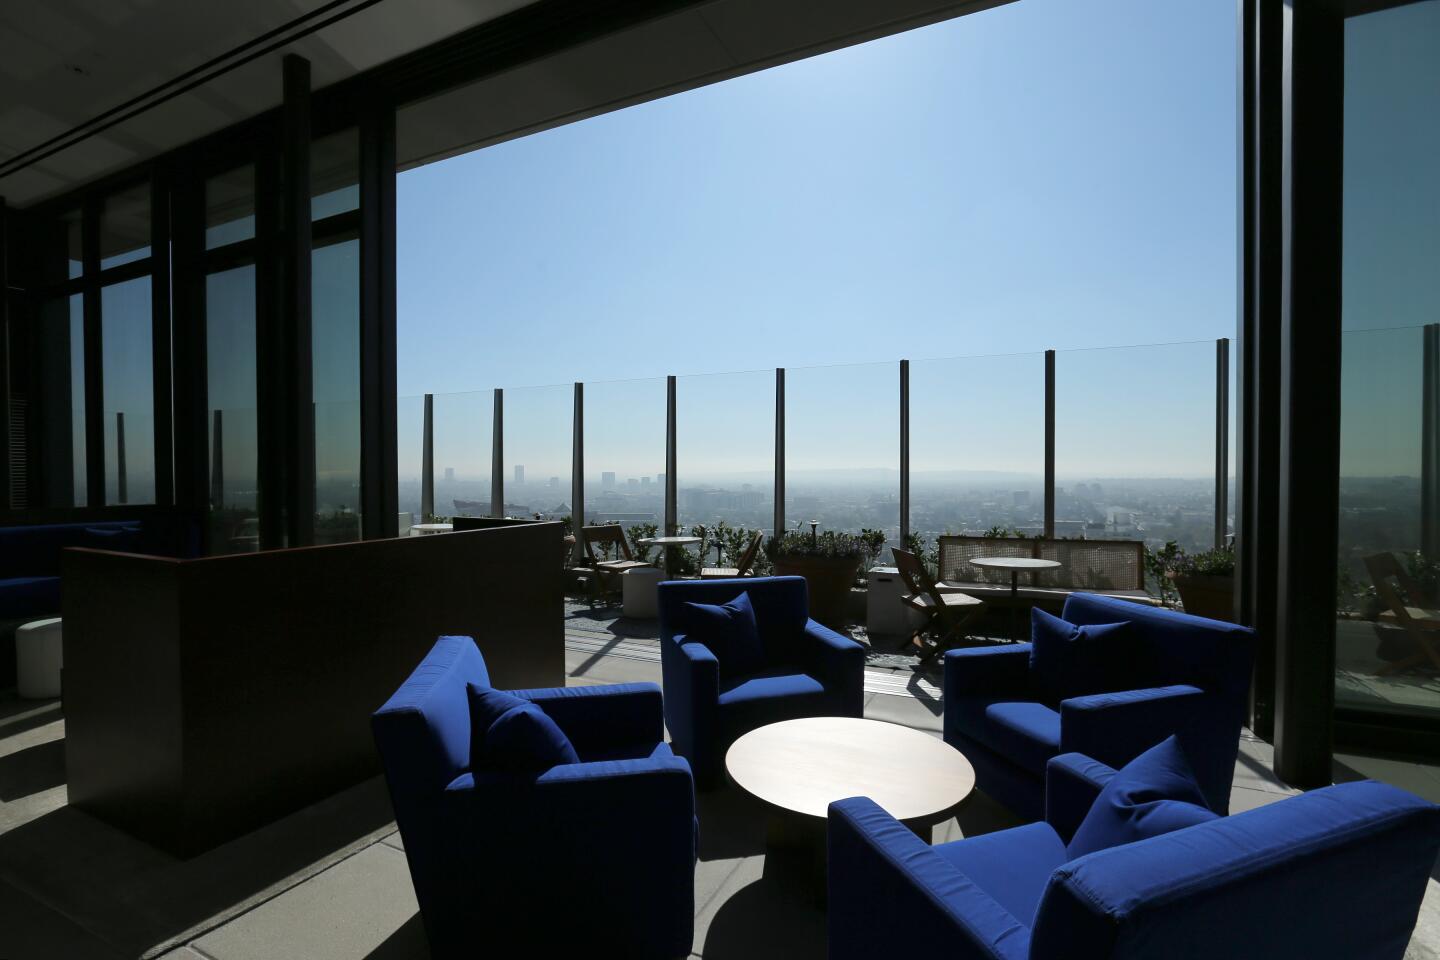 A seating area in the Roof, a rooftop bar at the new Edition hotel in West Hollywood, Calif.